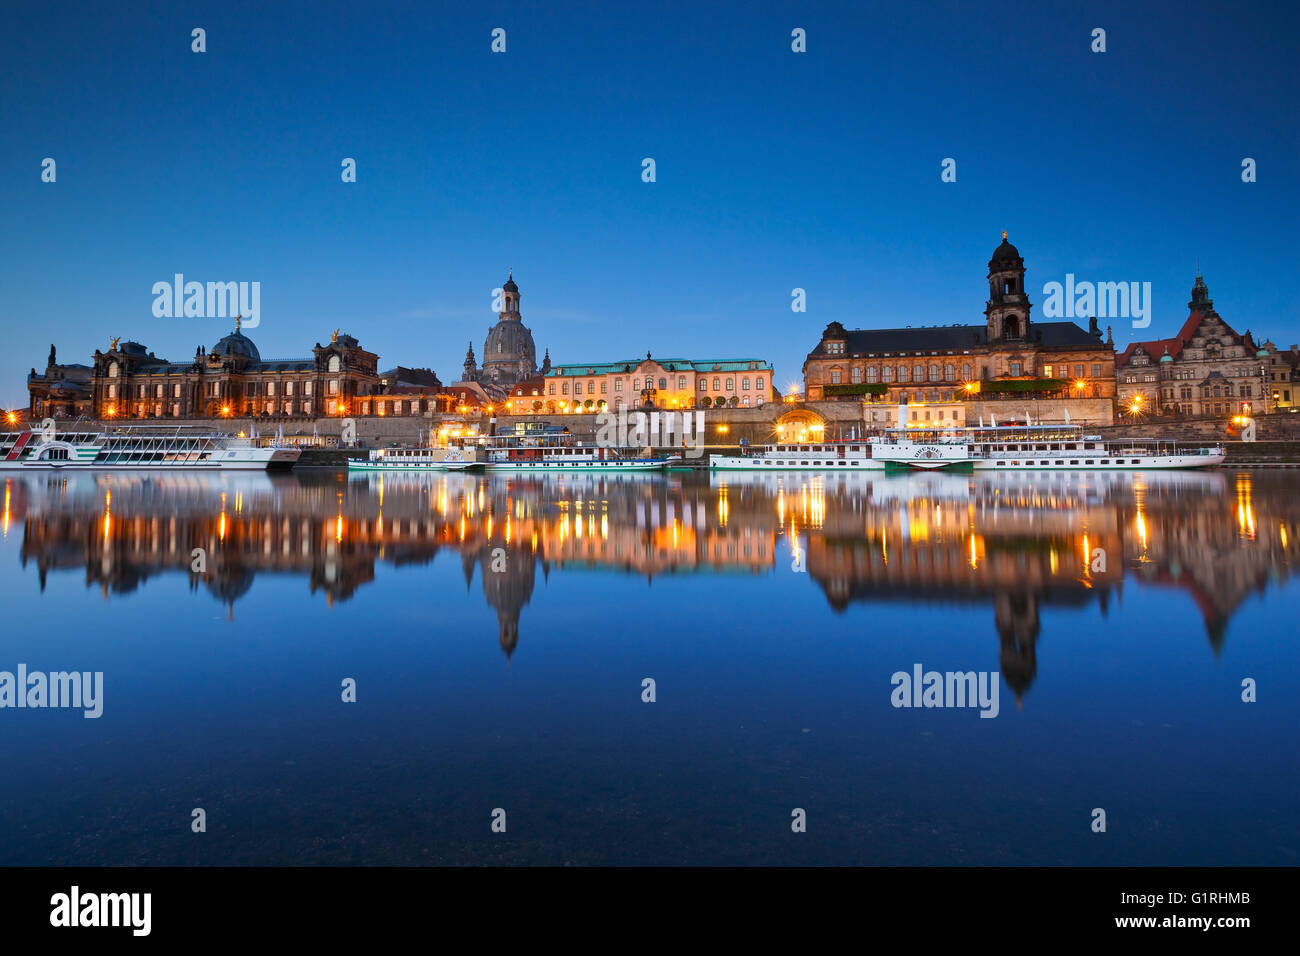 View of the old town of Dresden over river Elbe, Germany. Stock Photo